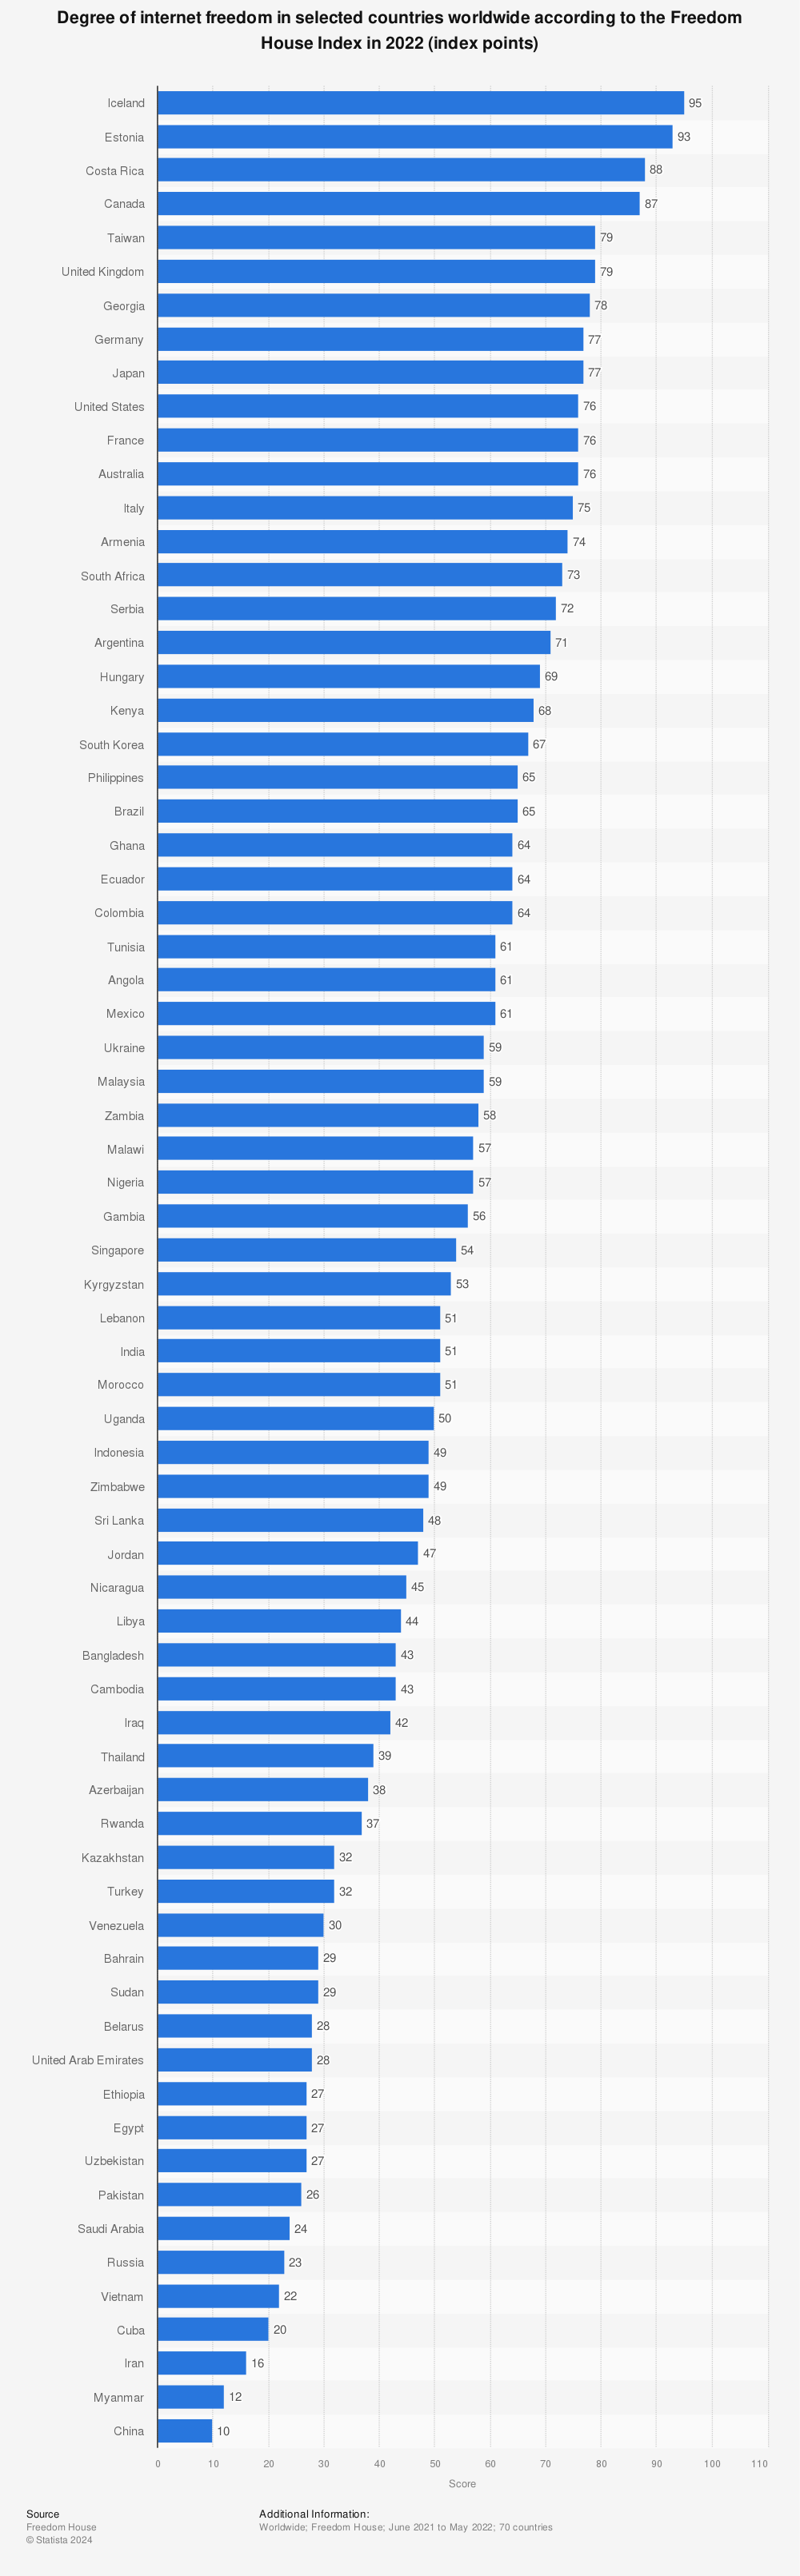 Statistic: Degree of internet freedom in selected countries according to the Freedom House Index 2021 (index points) | Statista